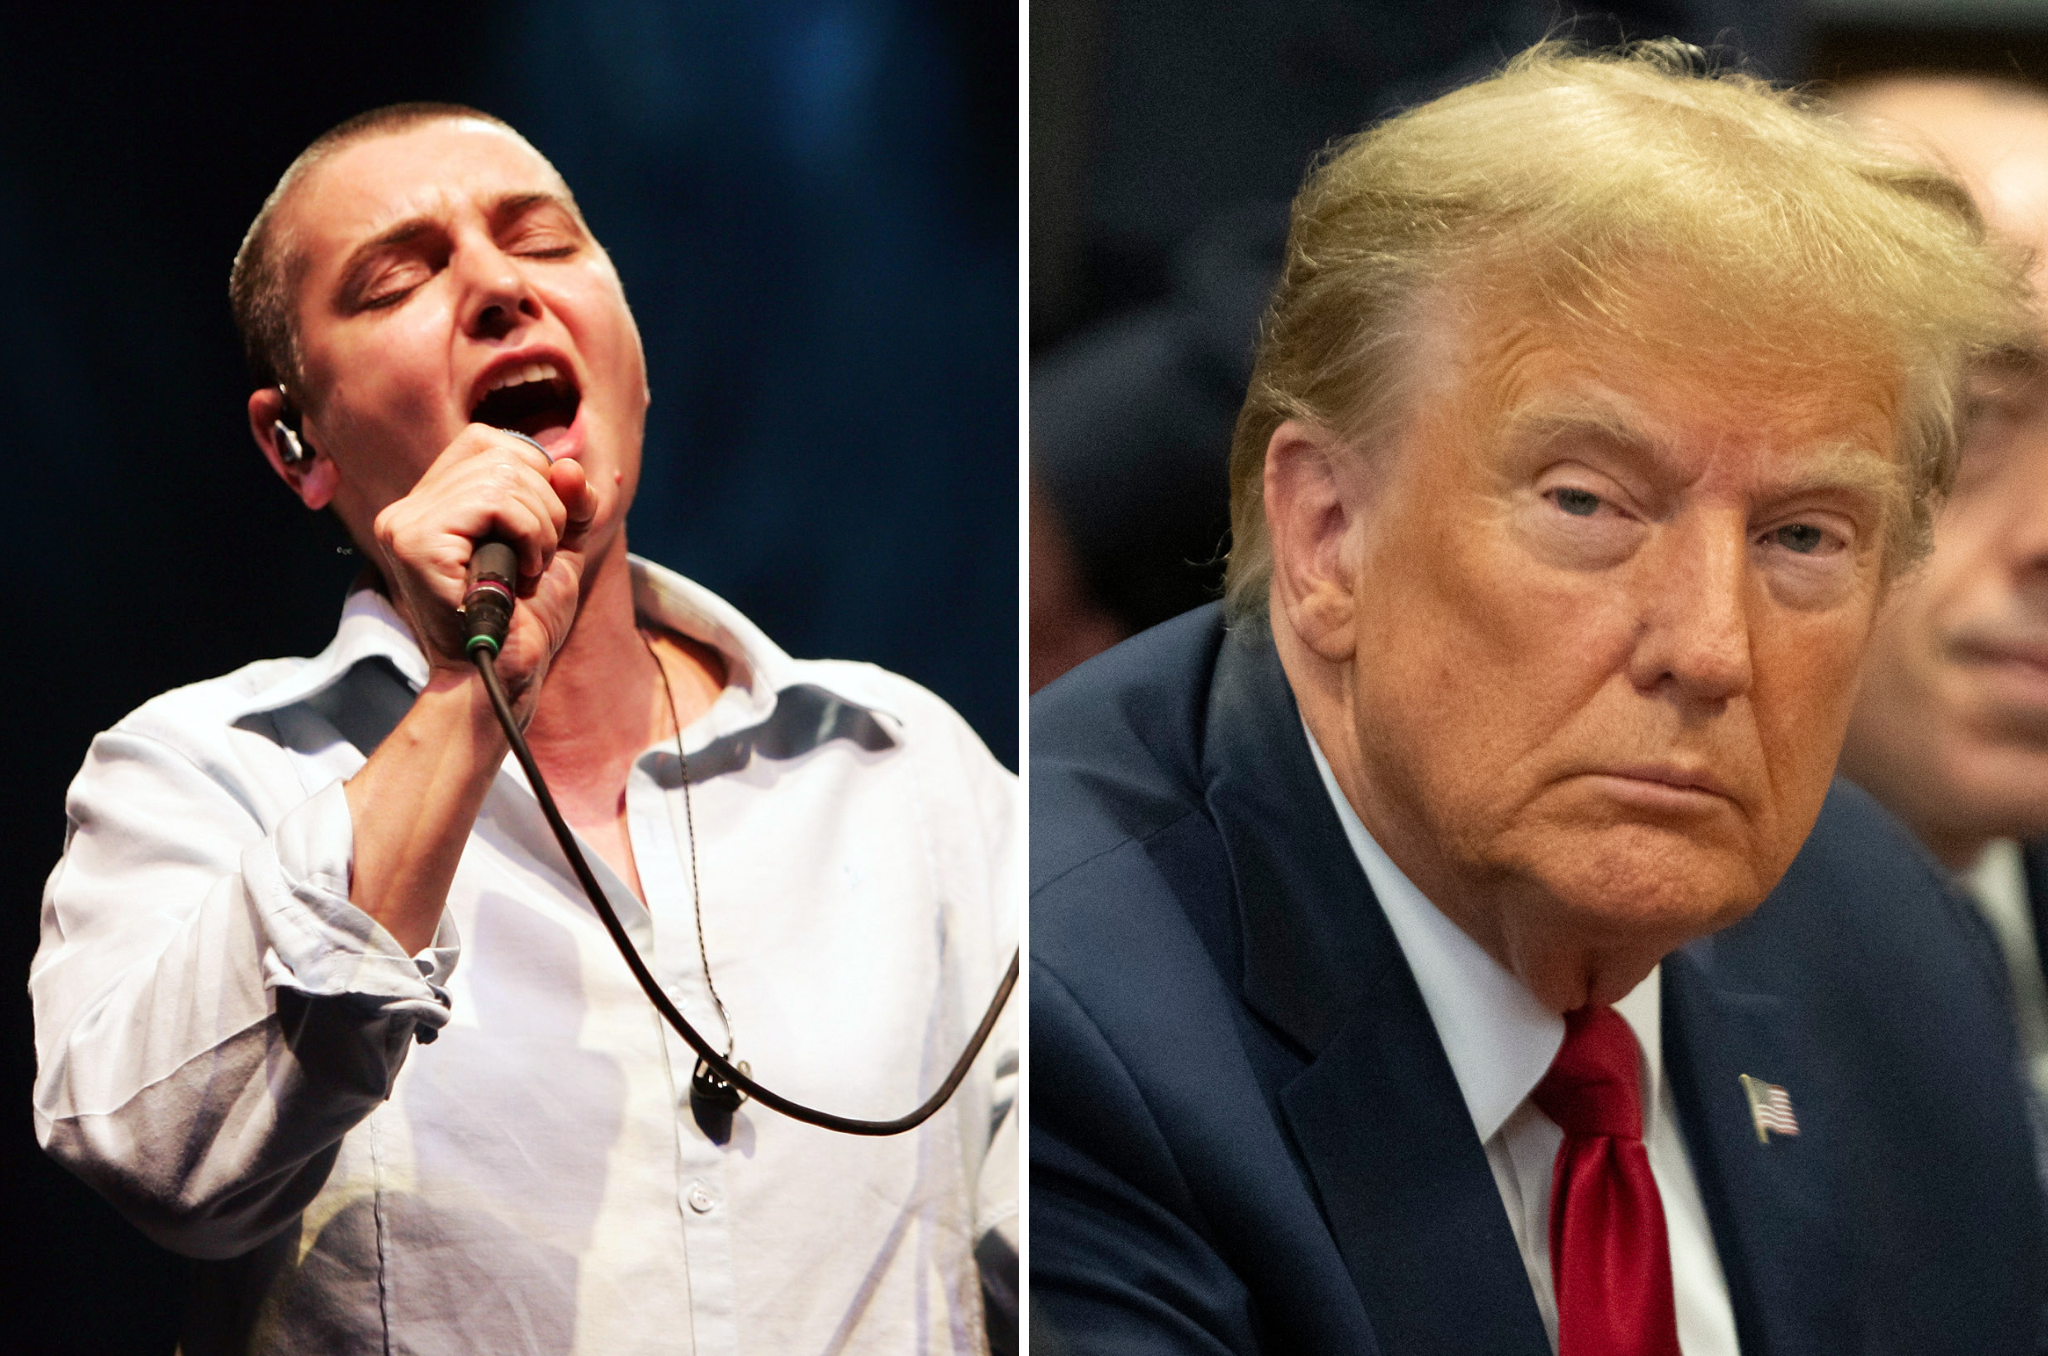 Sinéad O’Connor and Donald Trump